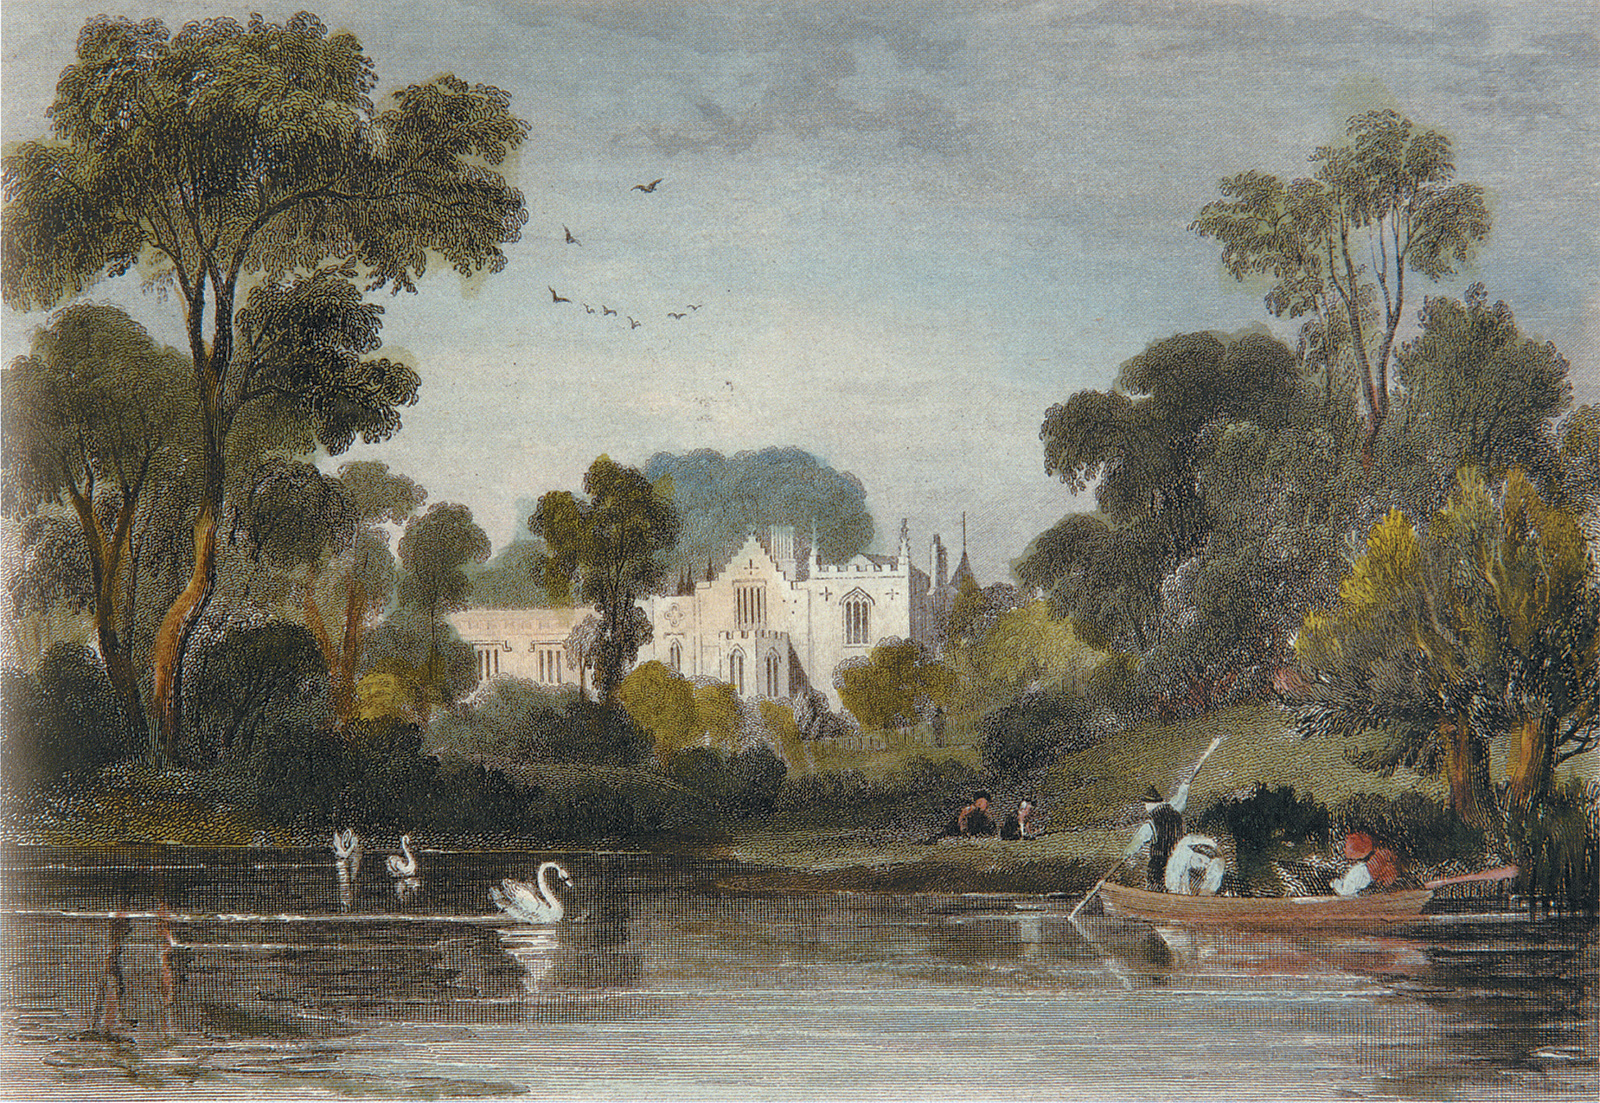 Horace Walpole’s country house, Strawberry Hill, in the nineteenth century